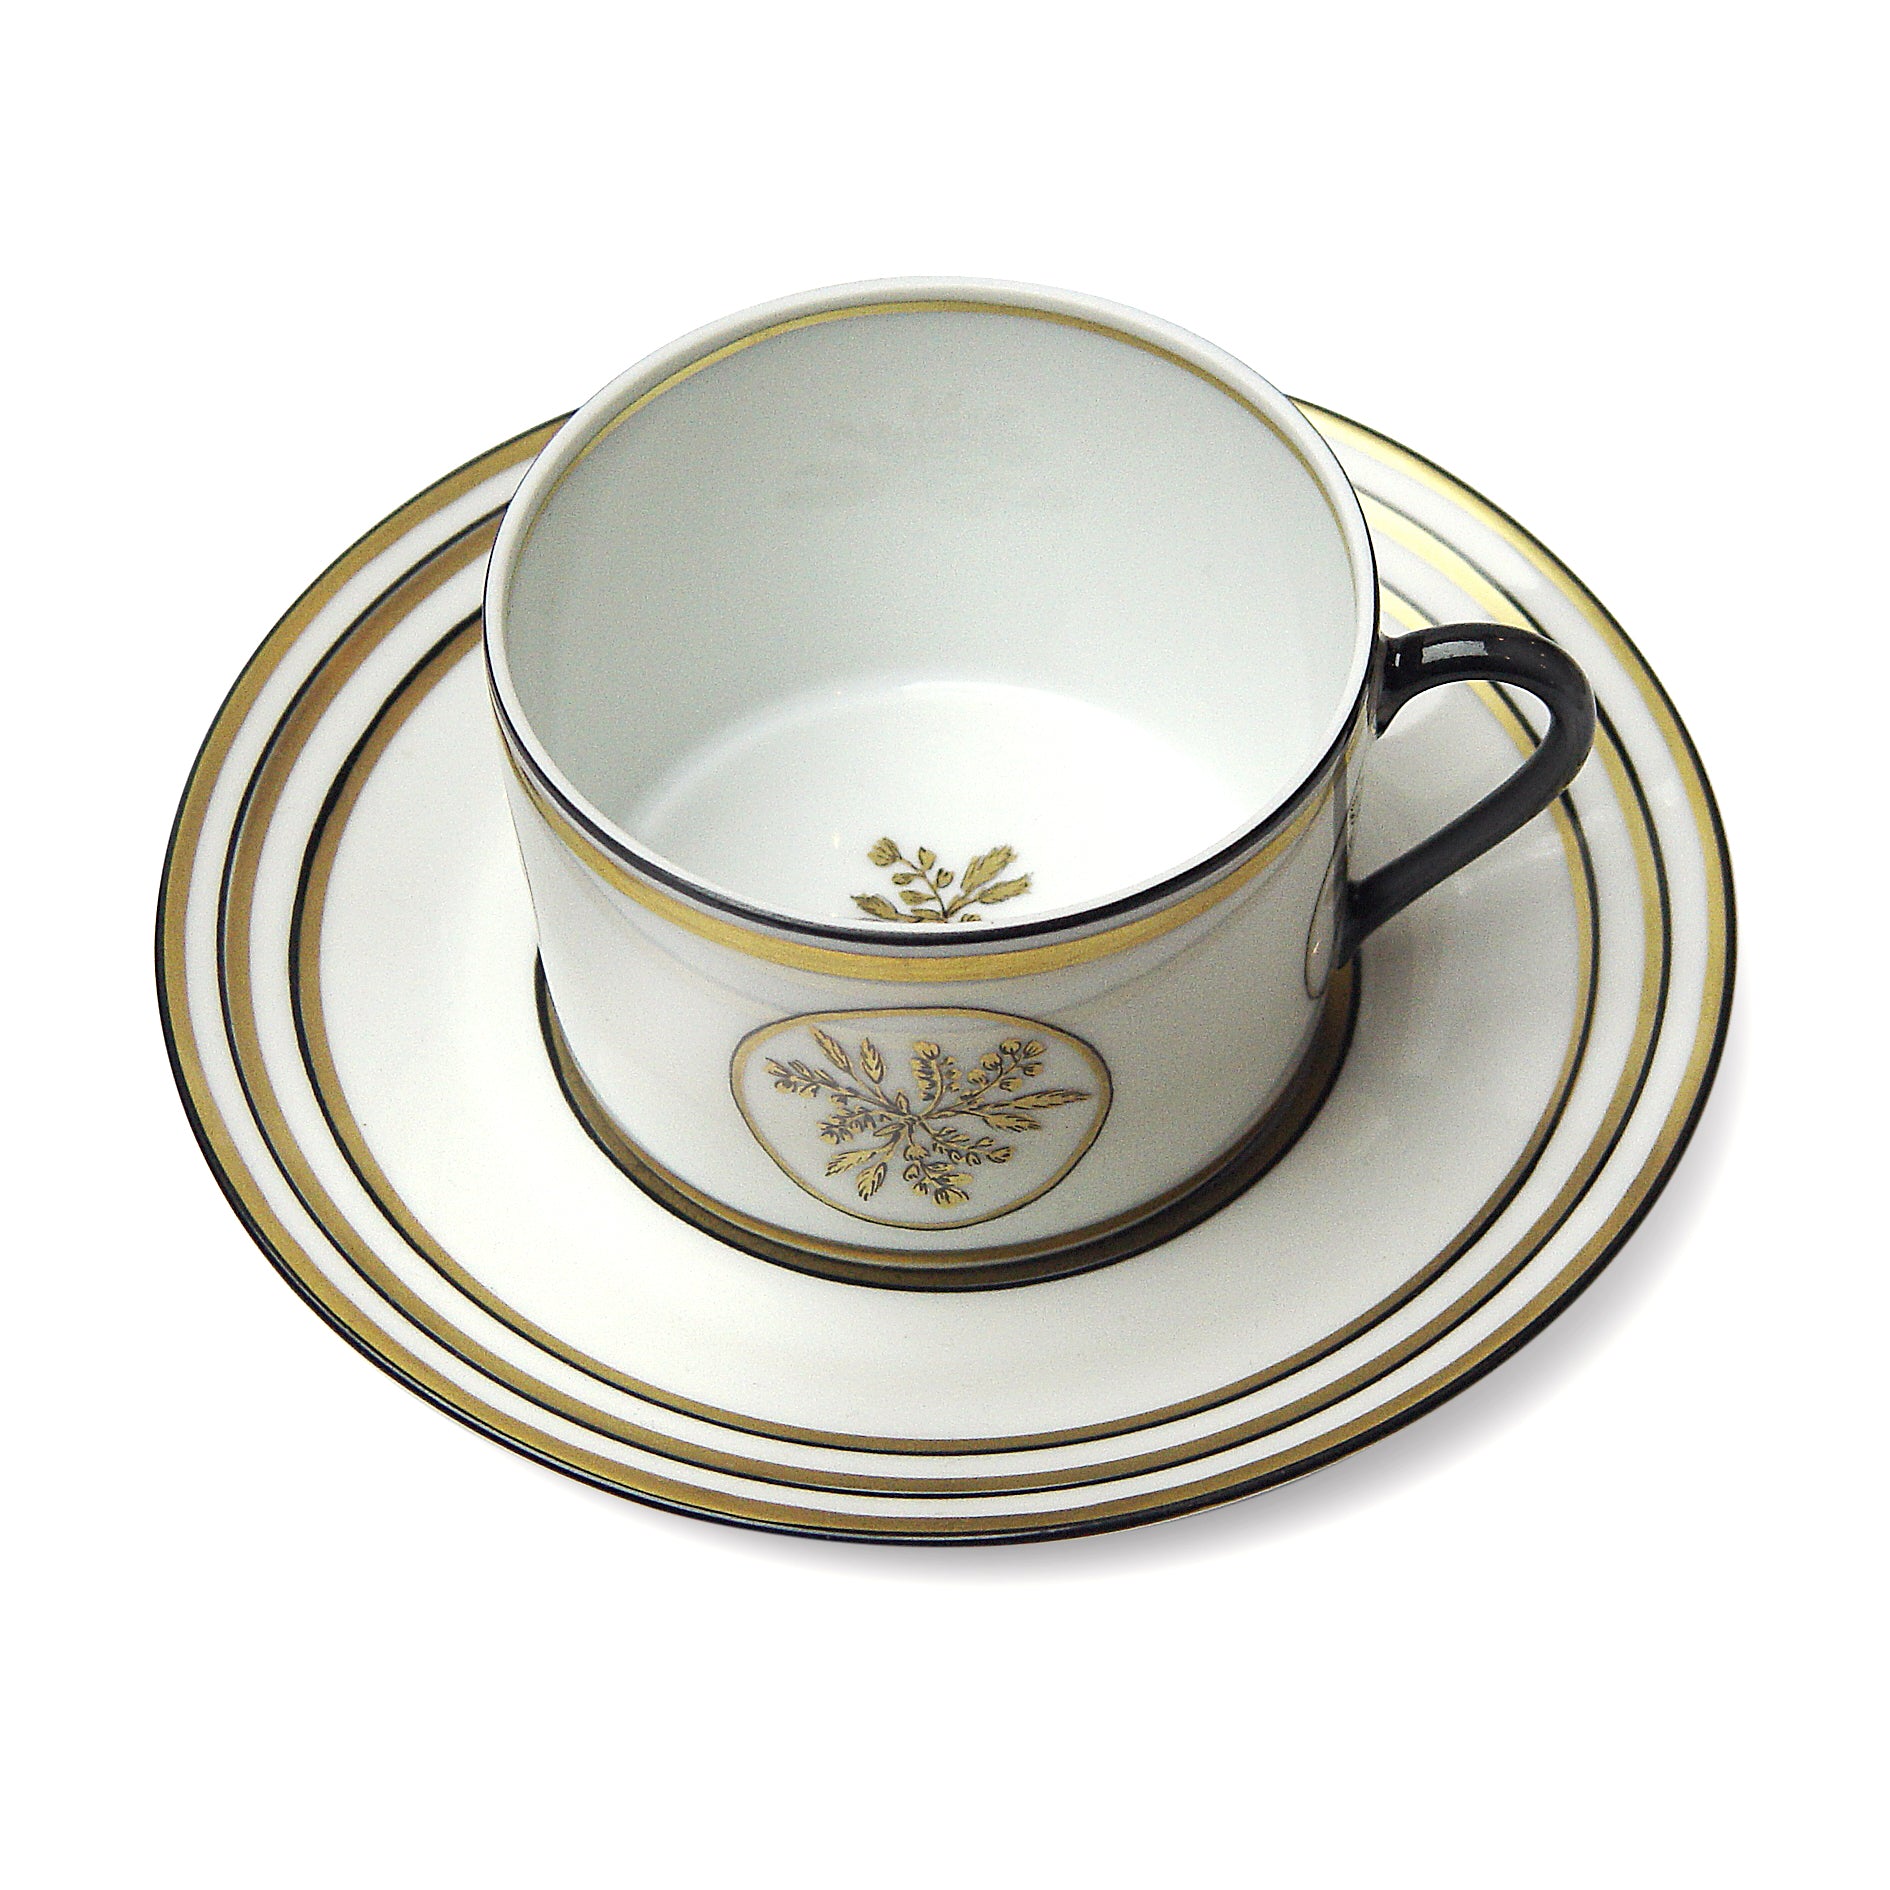 Or des Airs - Or des Mers - Tea cup and saucer
